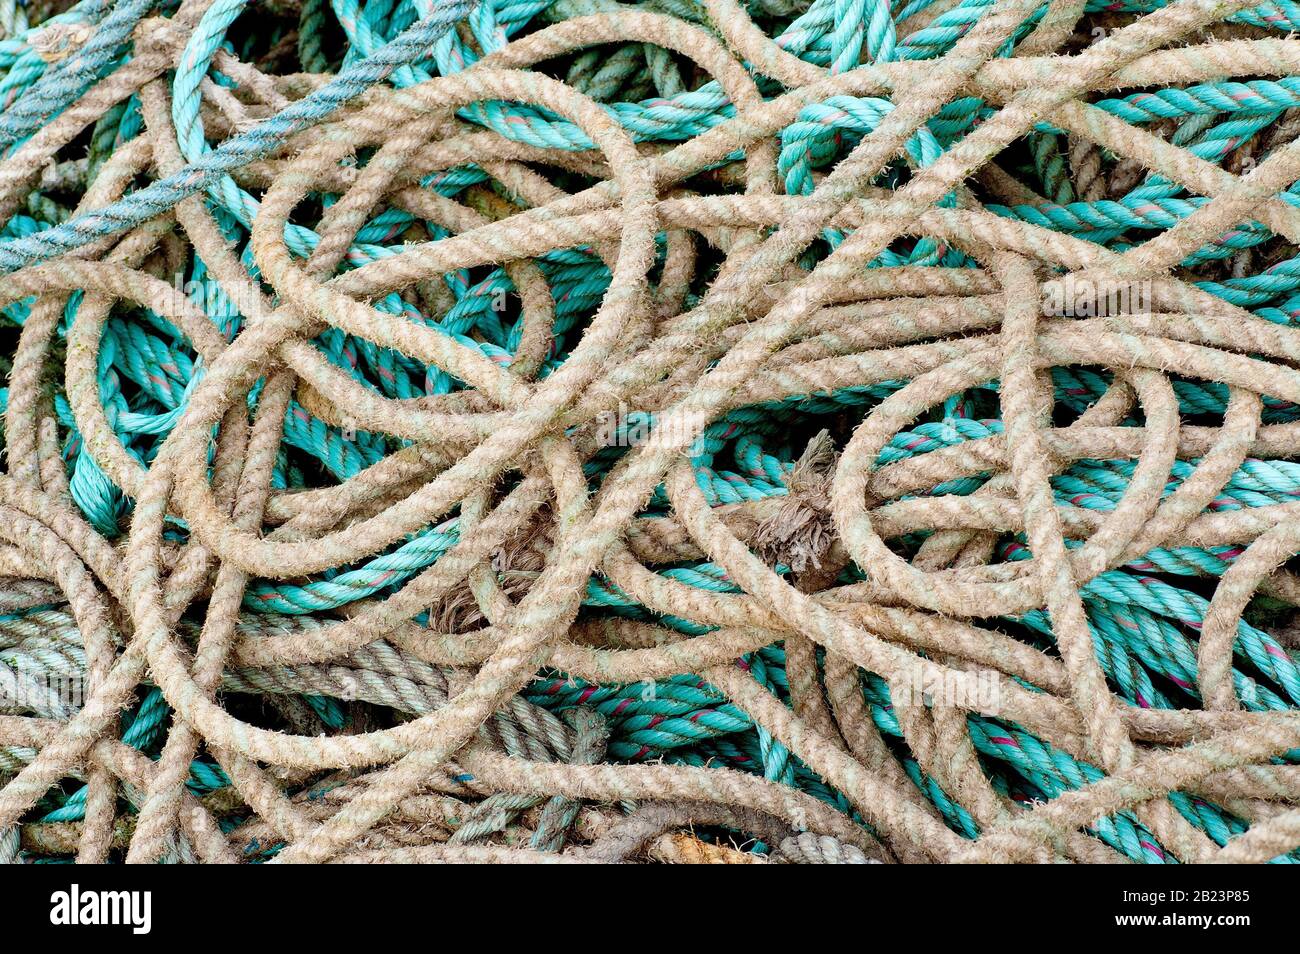 An abstract image of a pile of tangled ropes discarded on the quayside. Stock Photo